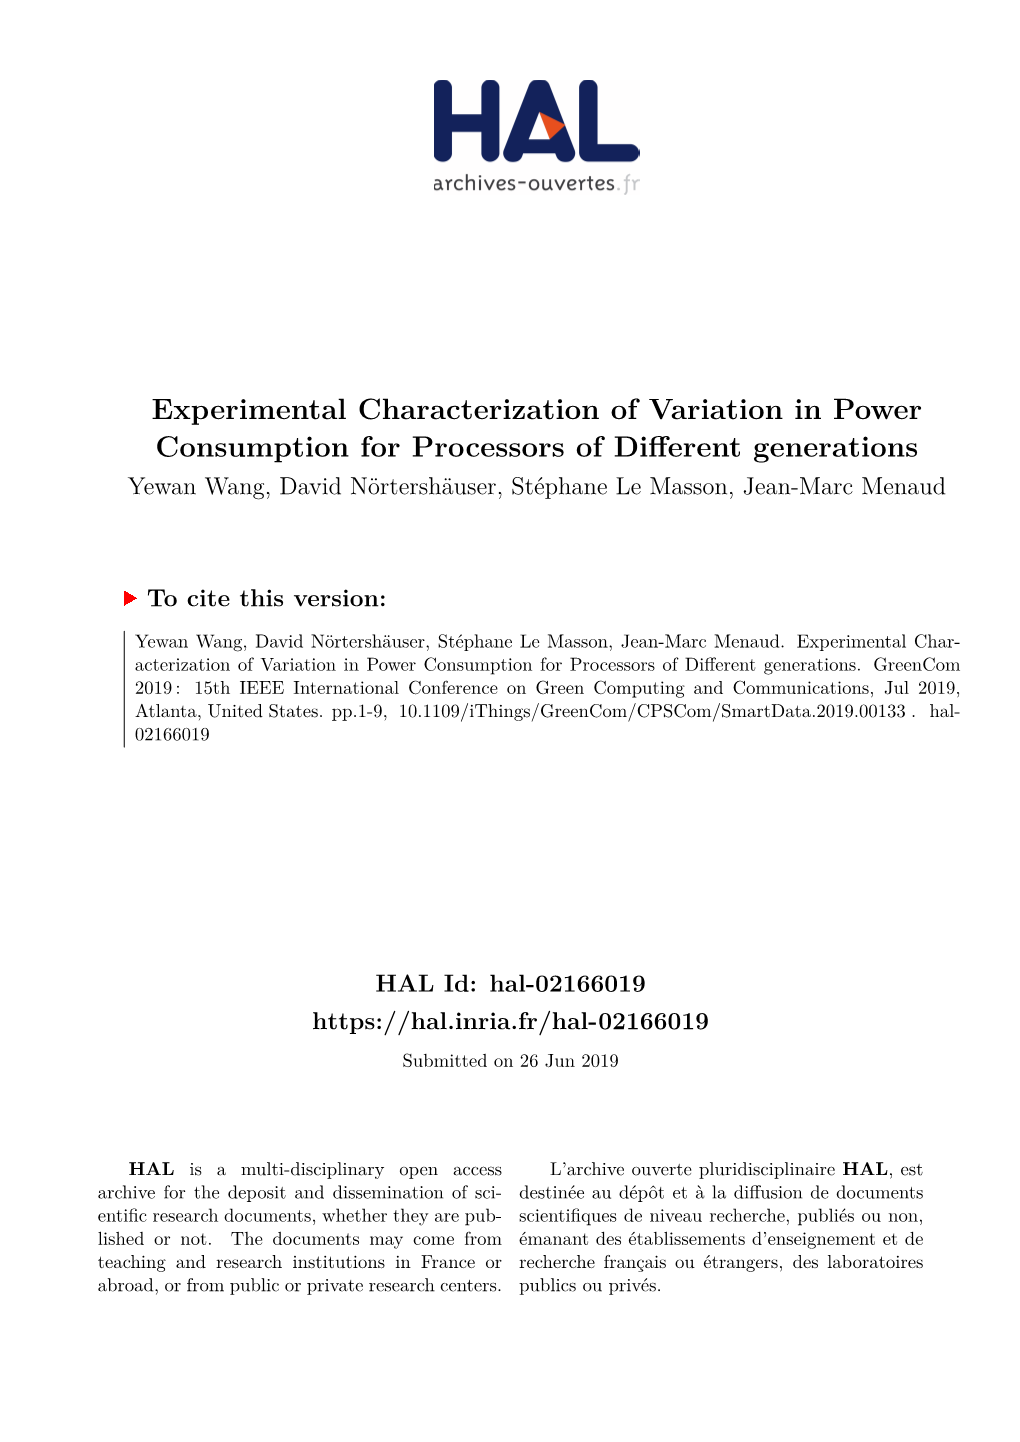 Experimental Characterization of Variation in Power Consumption For